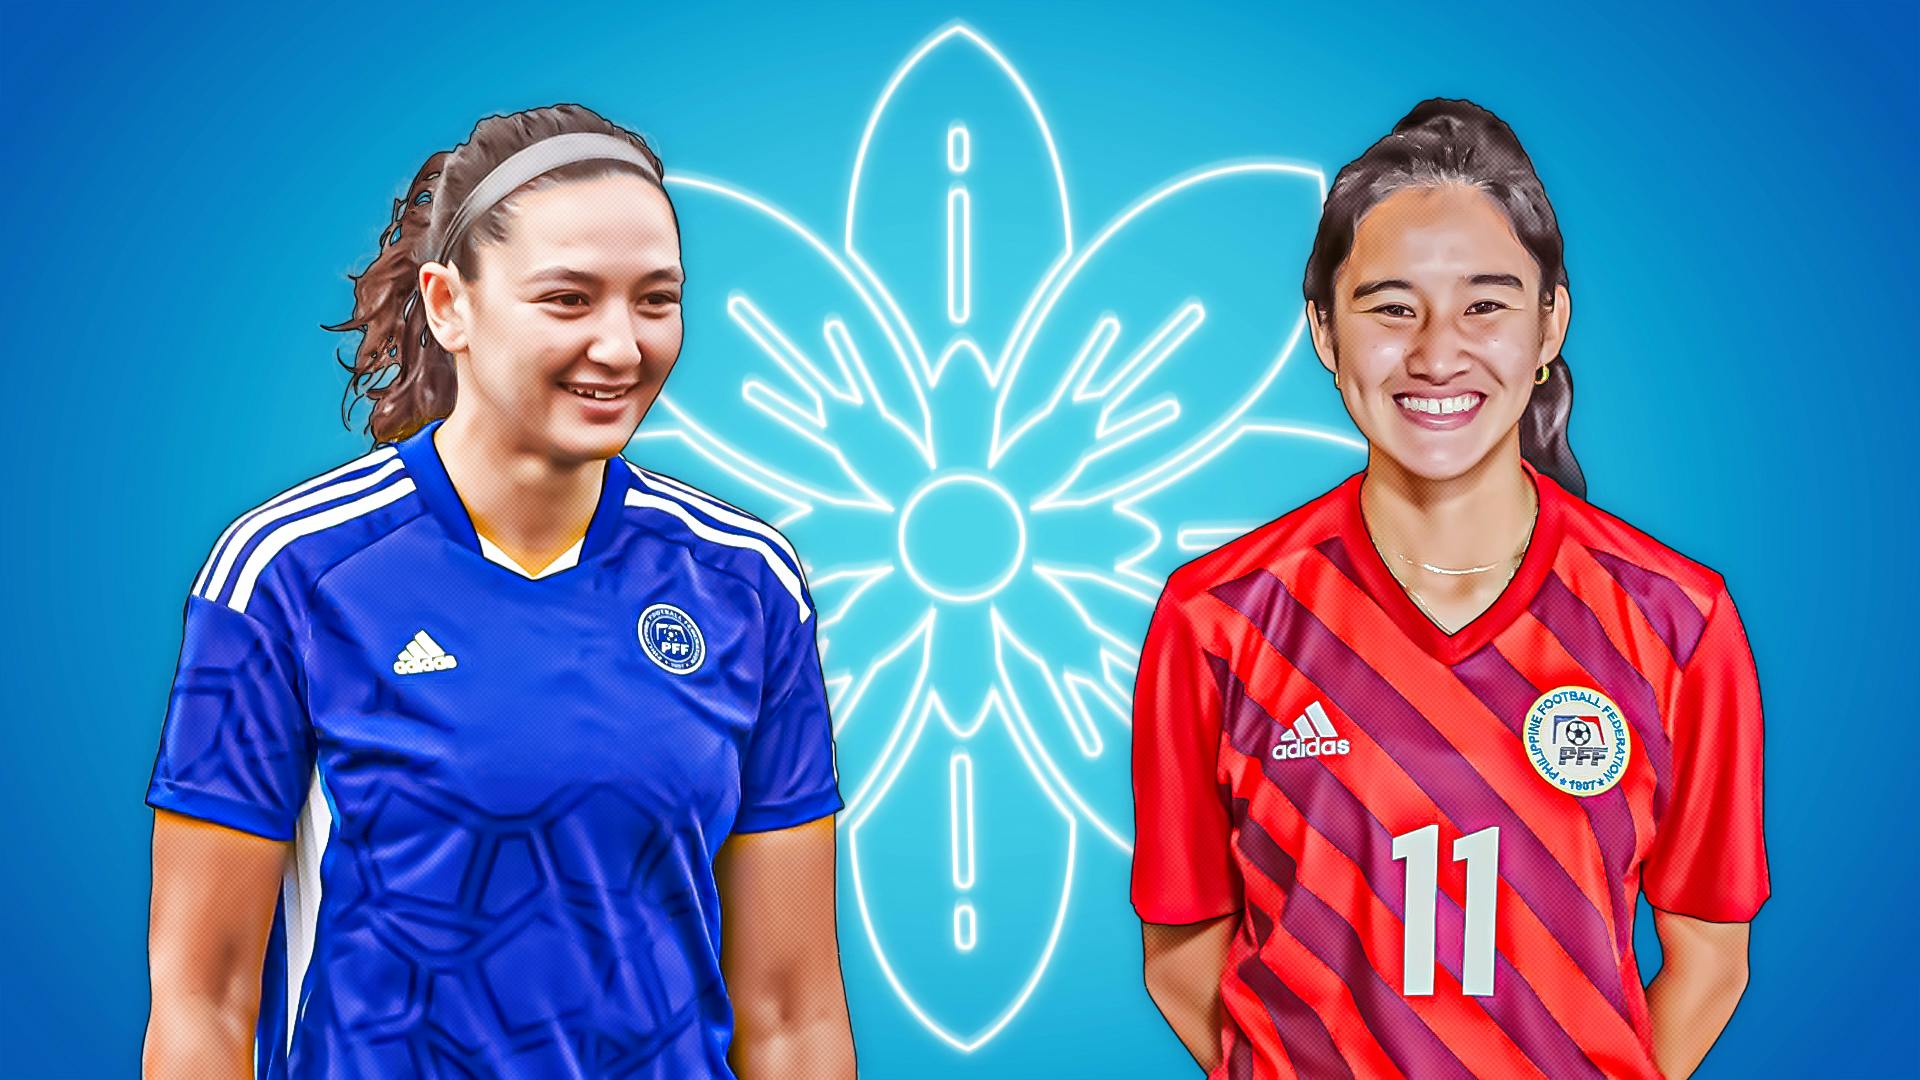 Abante Babae: Know more about Filipinas’ Ryley Bugay, Anicka Castañeda